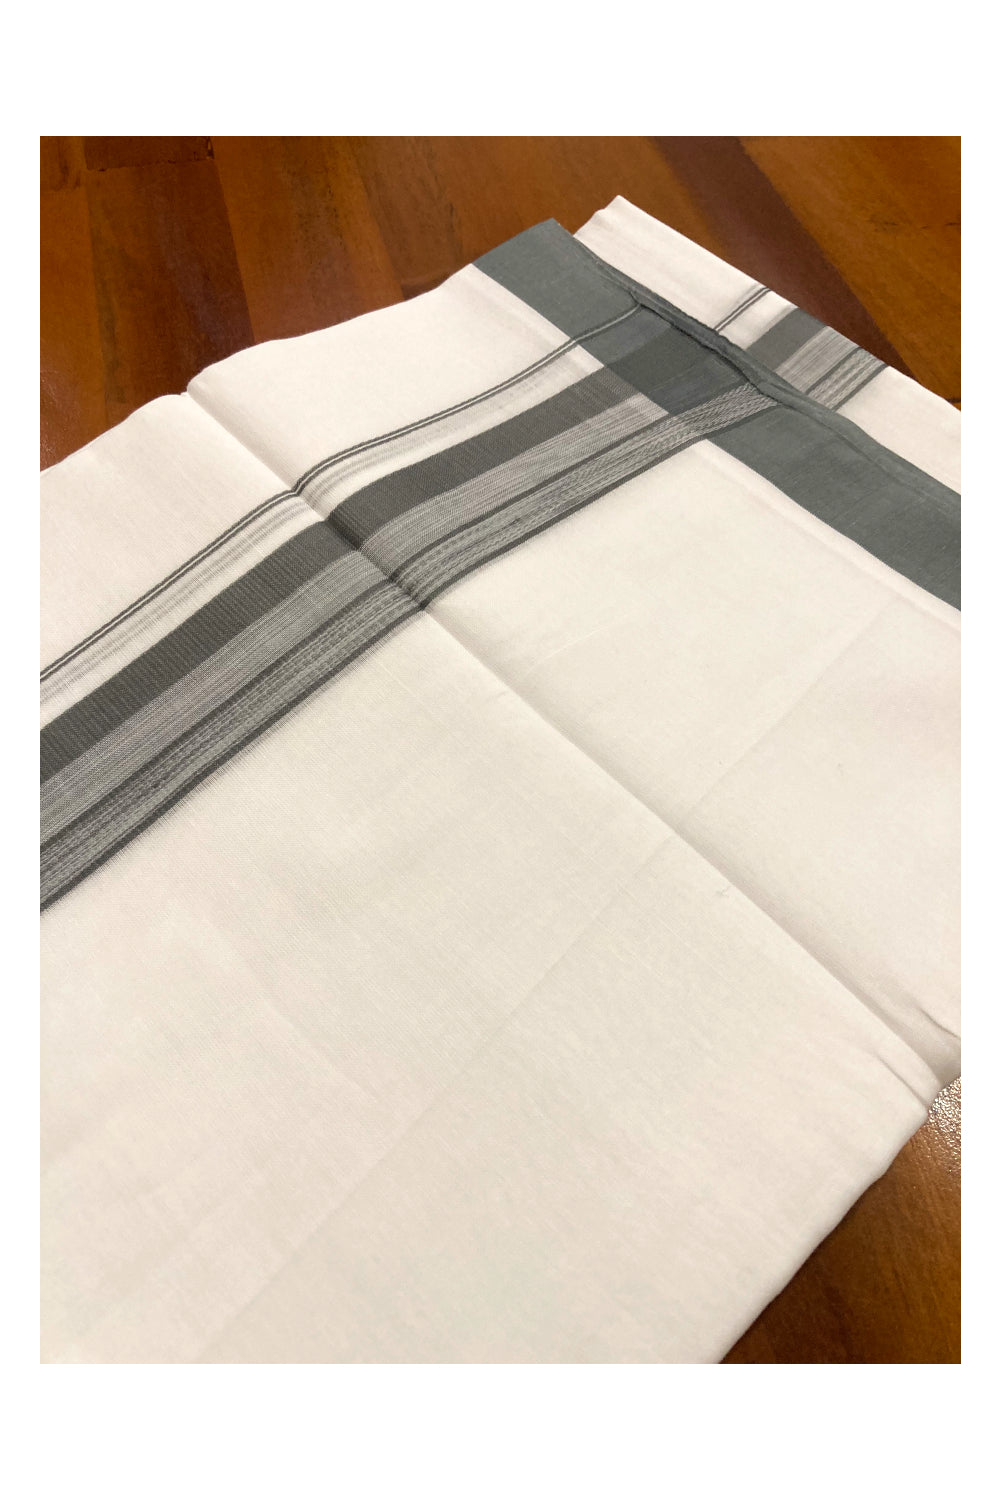 Pure White Cotton Double Mundu with Grey Border (South Indian Dhoti)